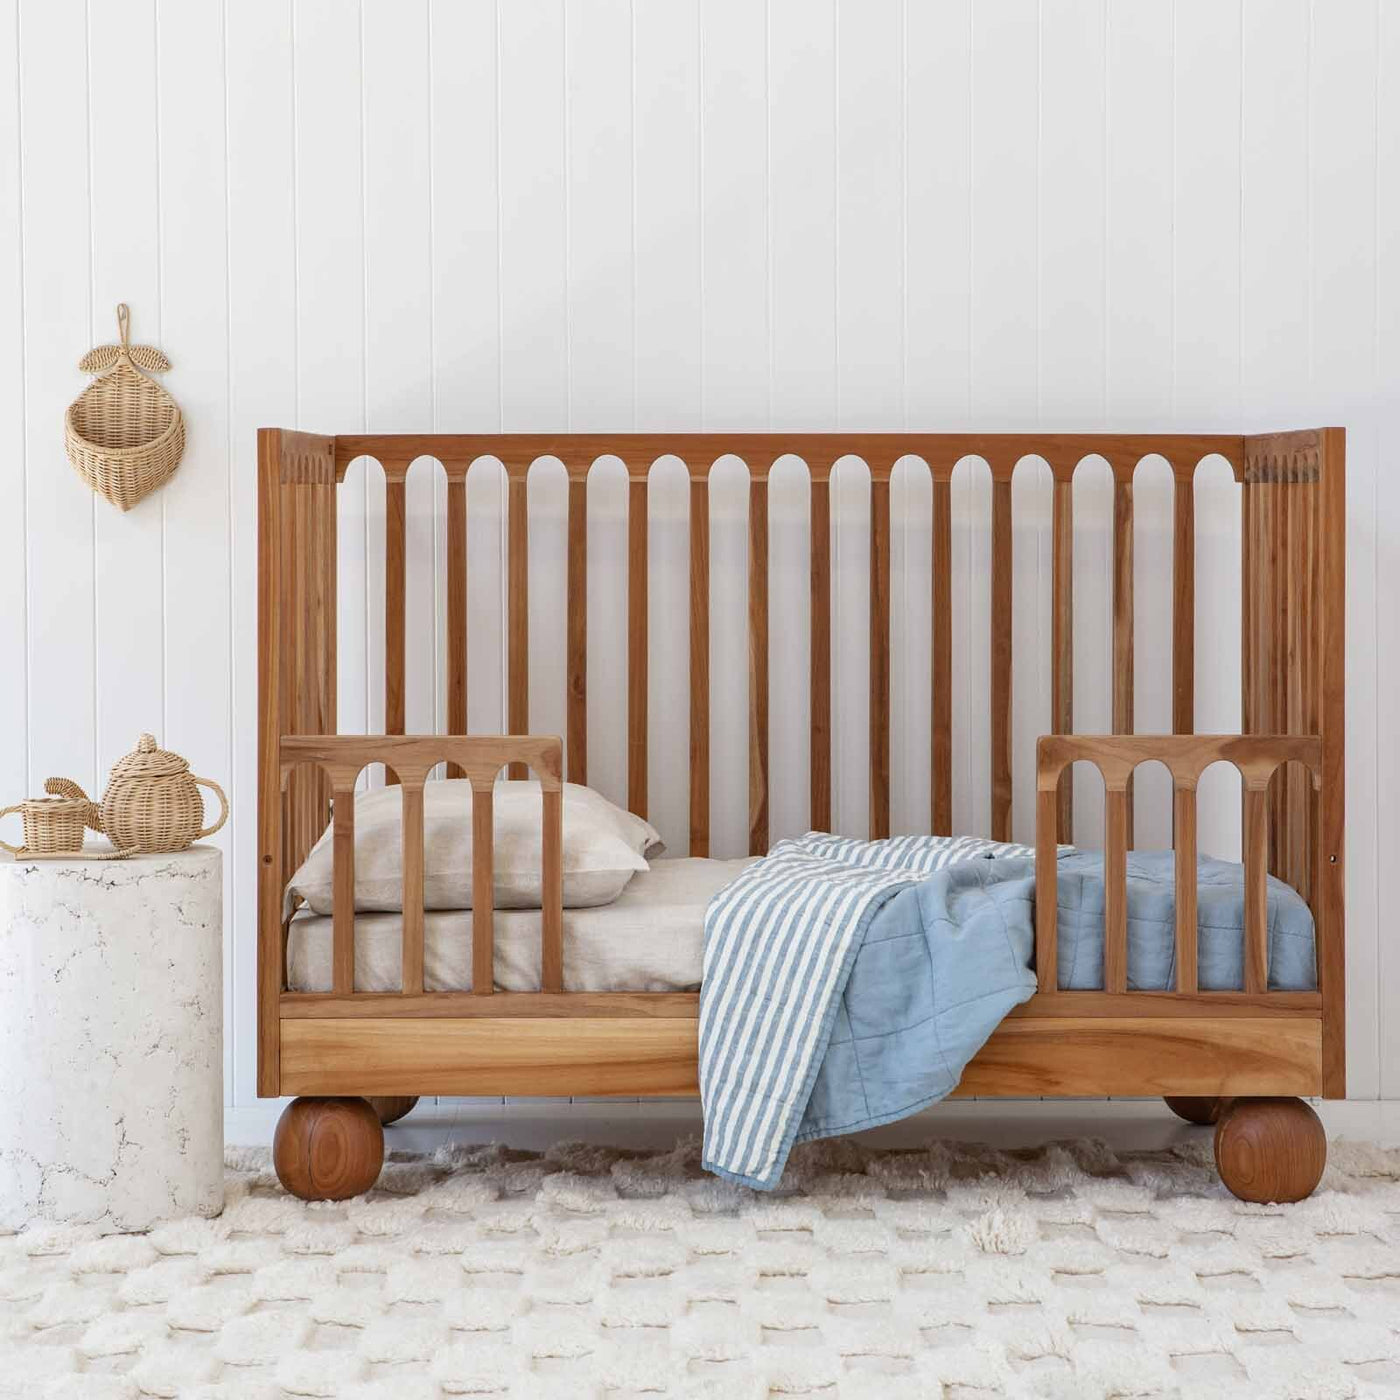 French Flax Linen Cot Quilt/Play Mat in Marine Blue/Marine Blue Stripe